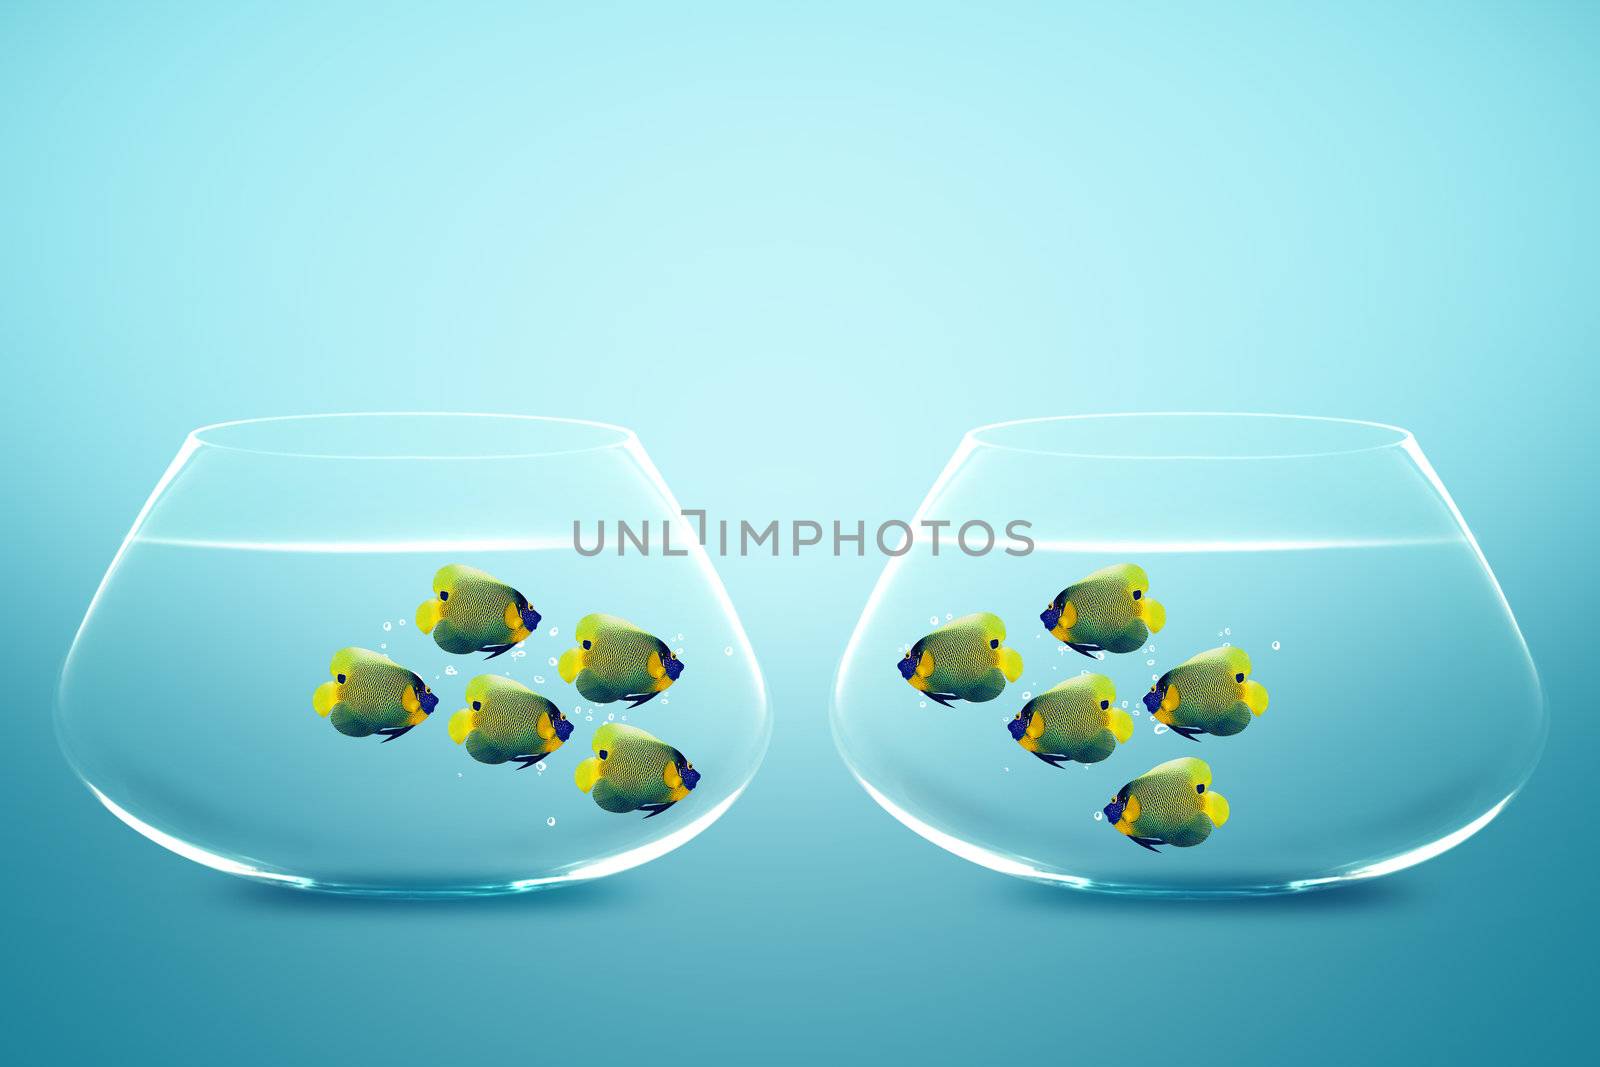 Two groups of angelfish in fishbowls looking to each other.